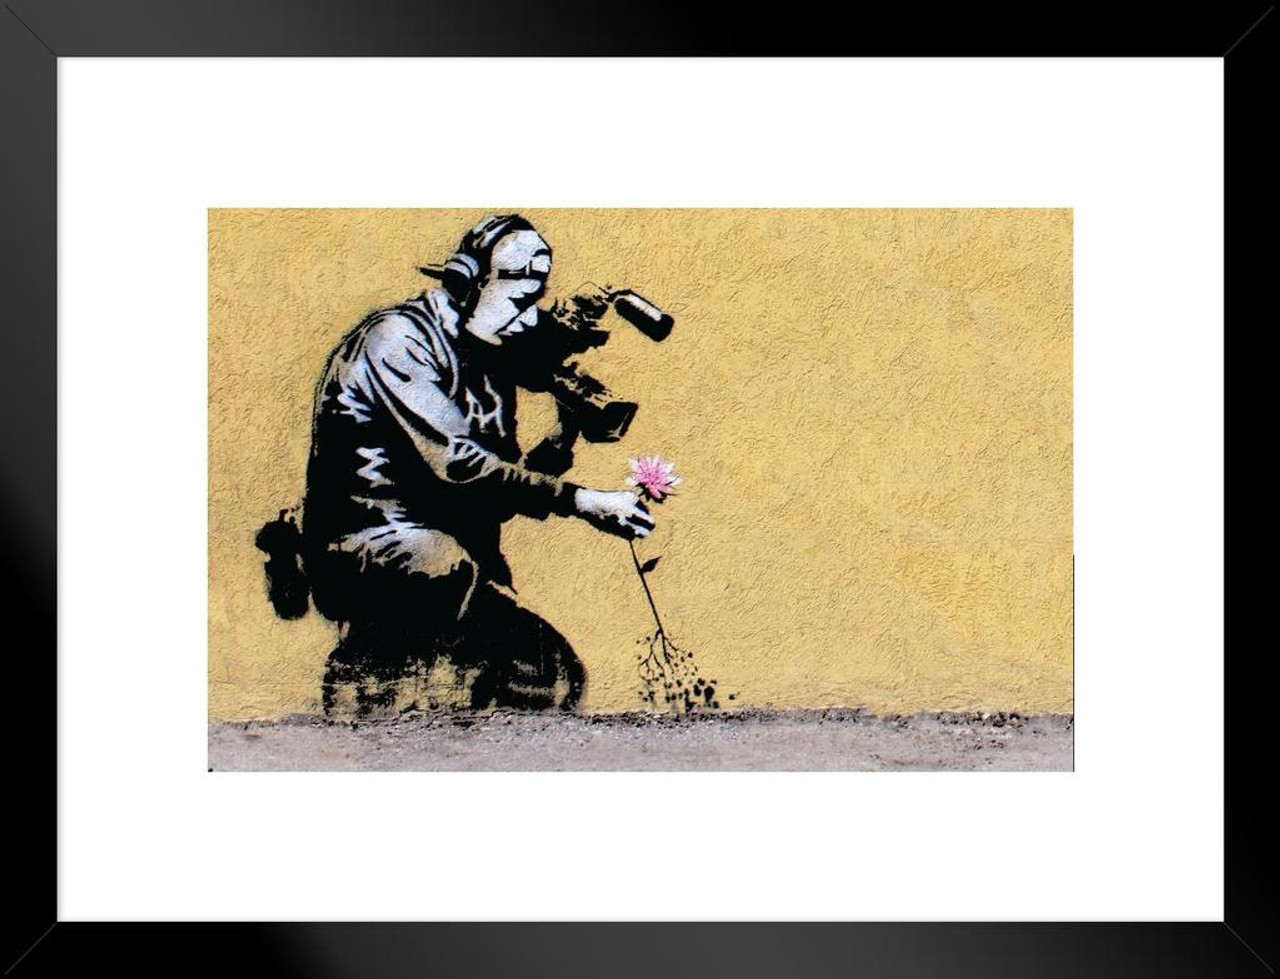 Banksy Camera Man and Flower Graffiti Stencil Street Art Urban Spray Paint  Matted Framed Poster 26x20 inch - Poster Foundry